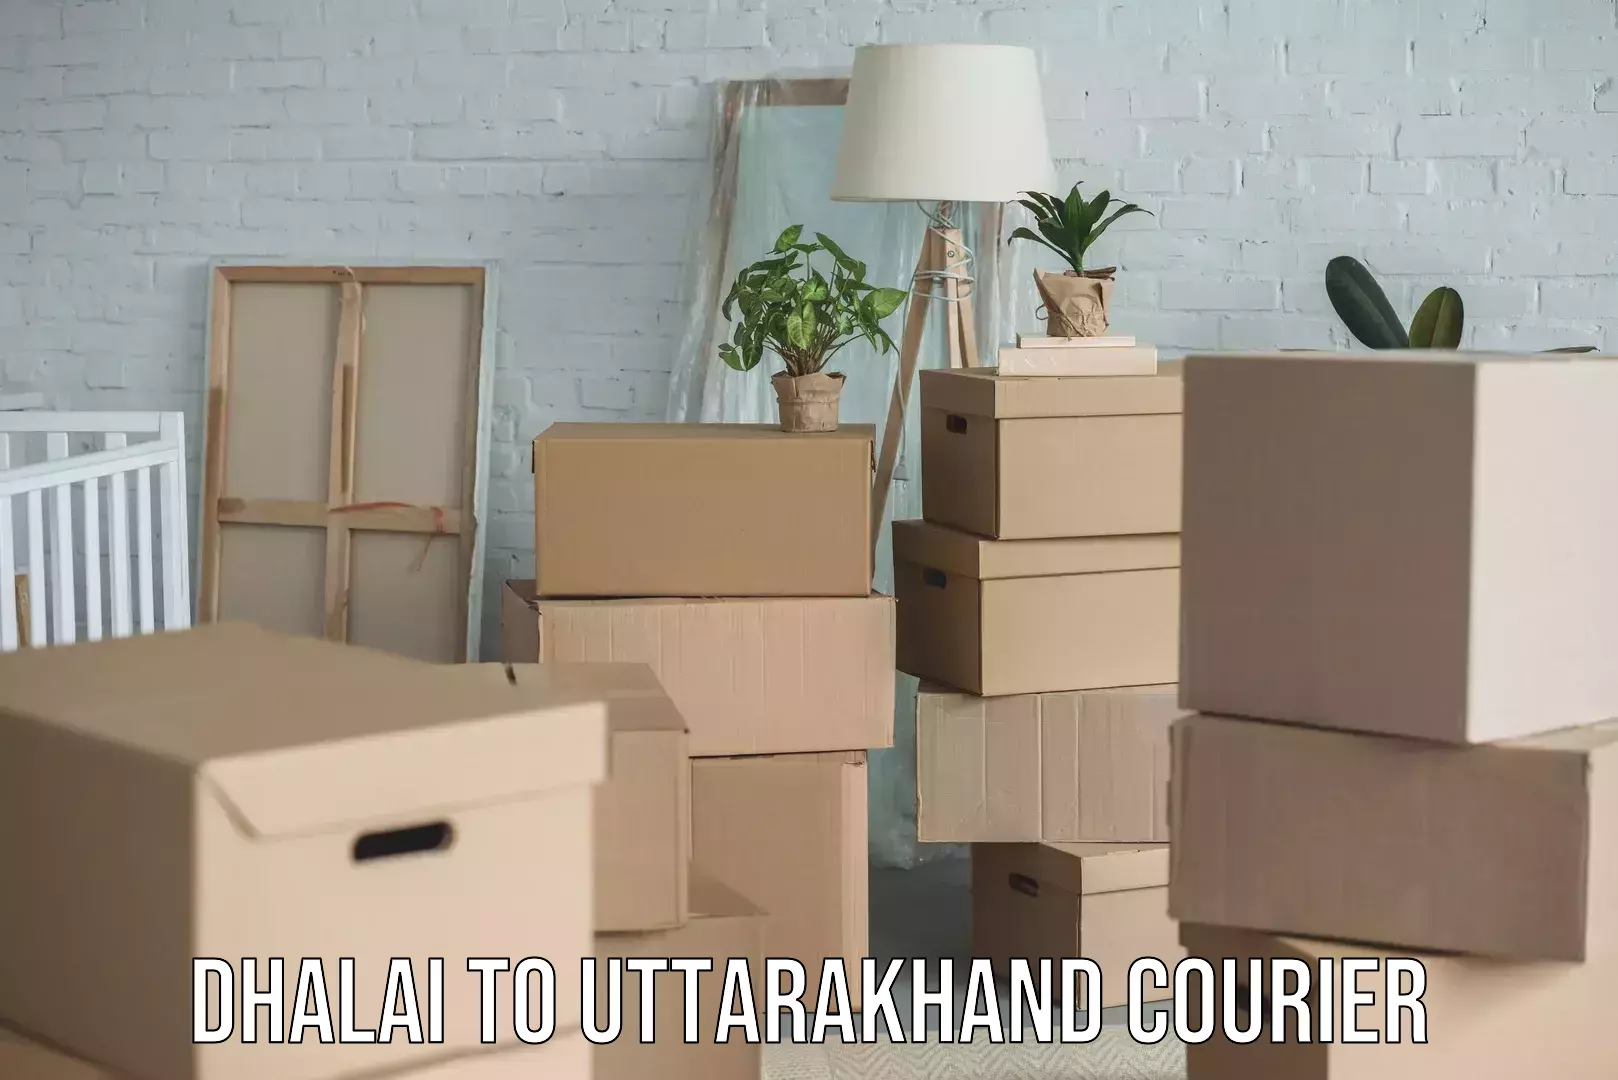 Local delivery service Dhalai to Uttarakhand